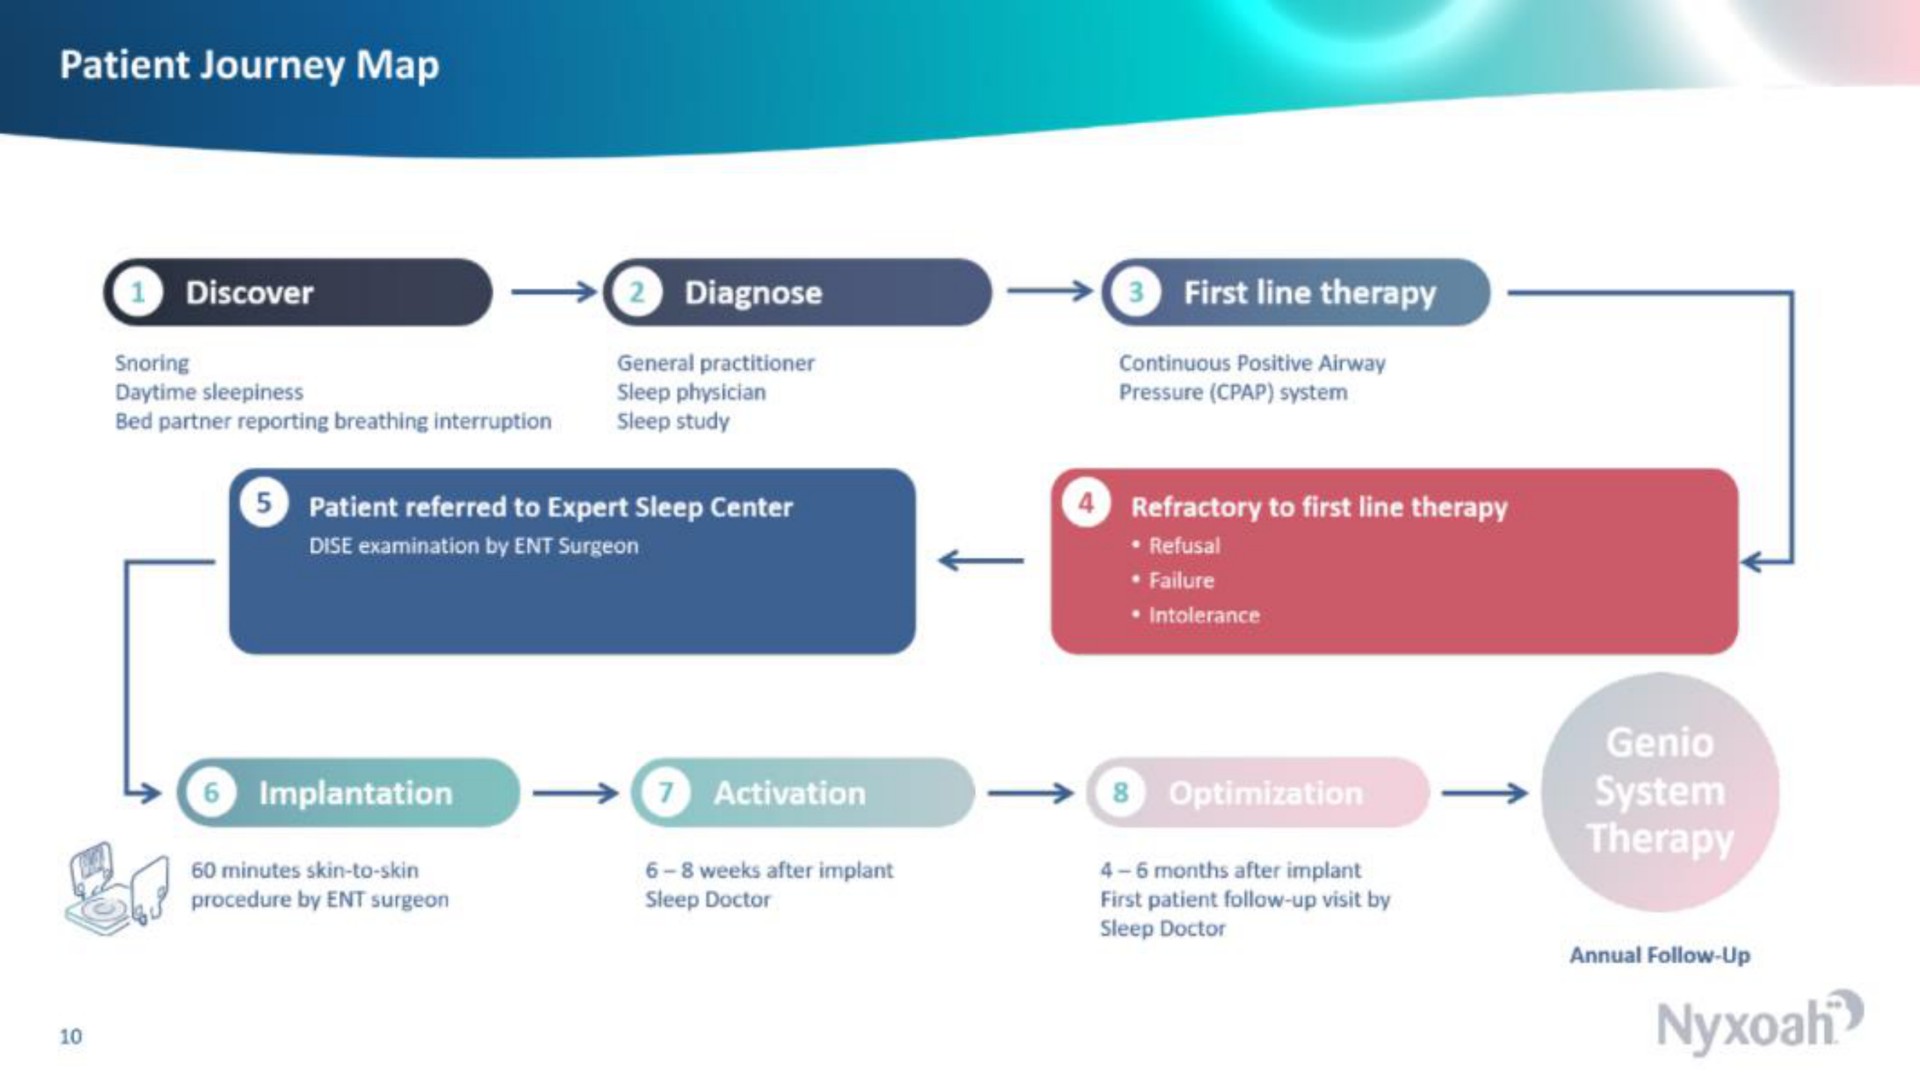 patient journey map cee ase | Nyxoah